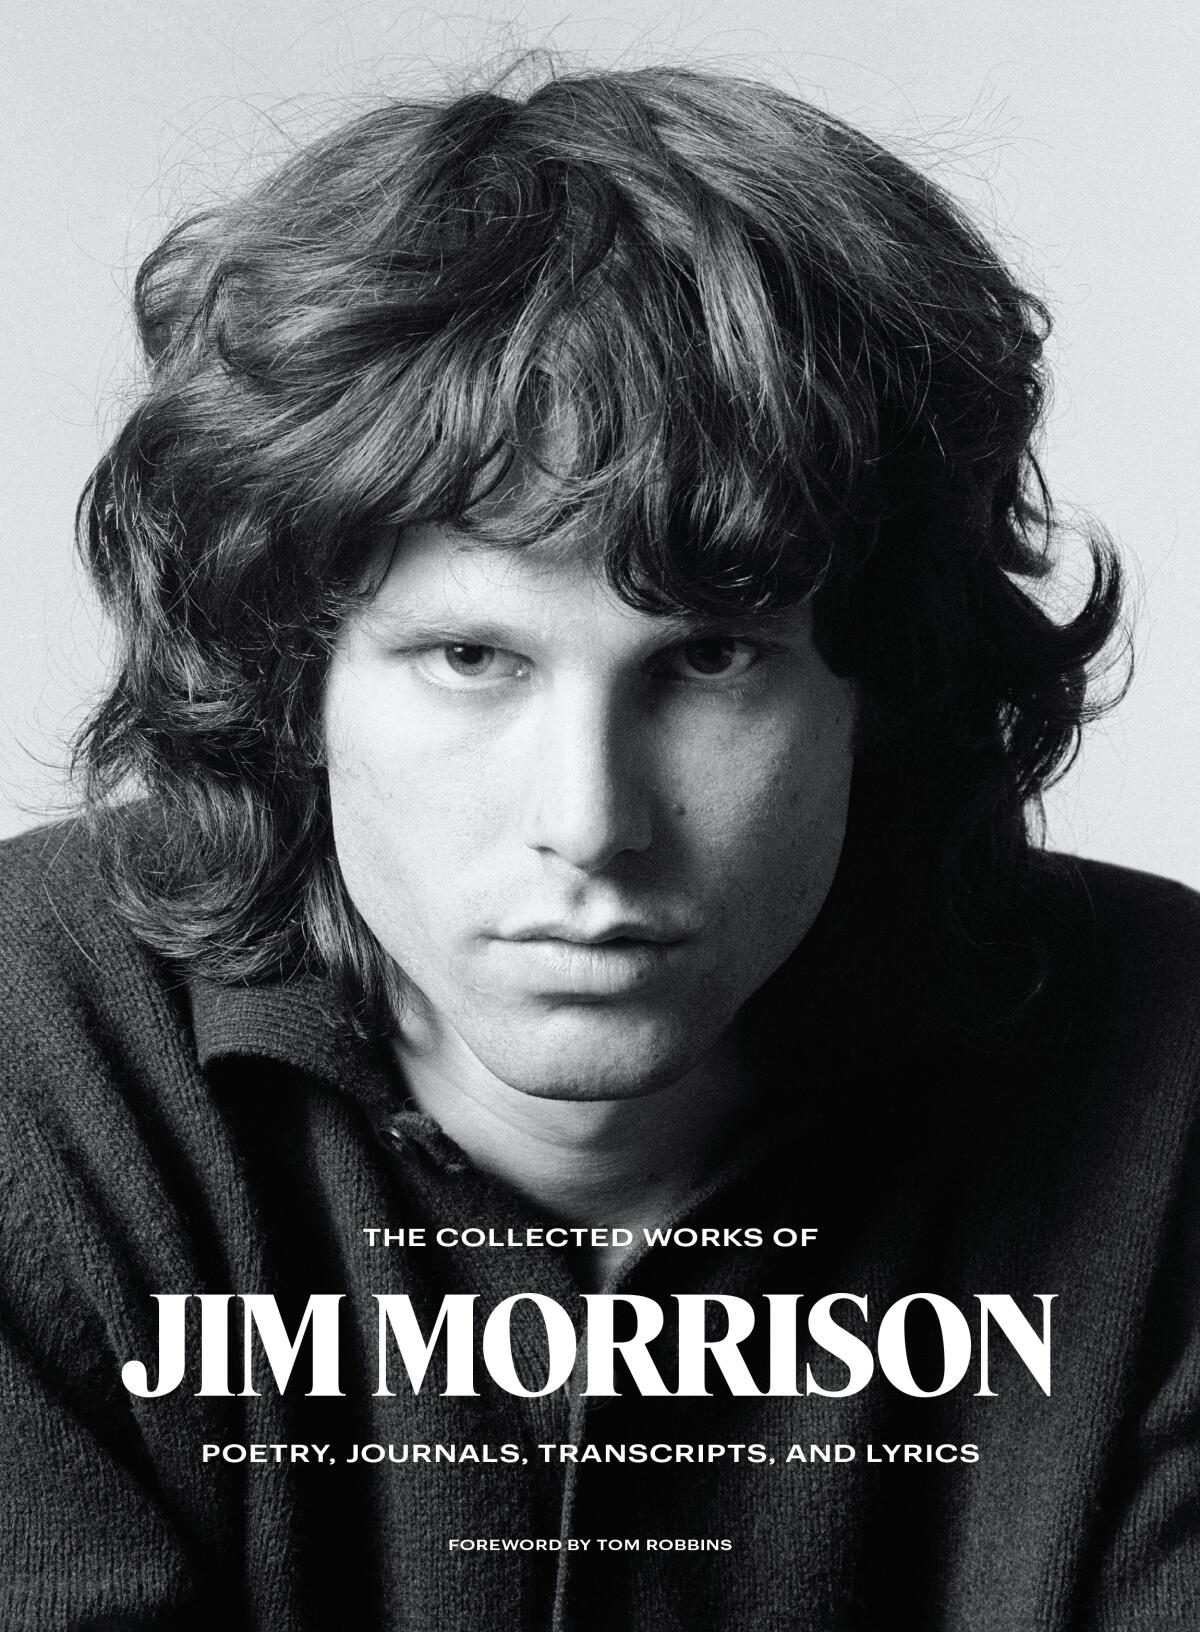 "The Collected Works of Jim Morrison: Poetry, Journals, Transcripts and Lyrics" 